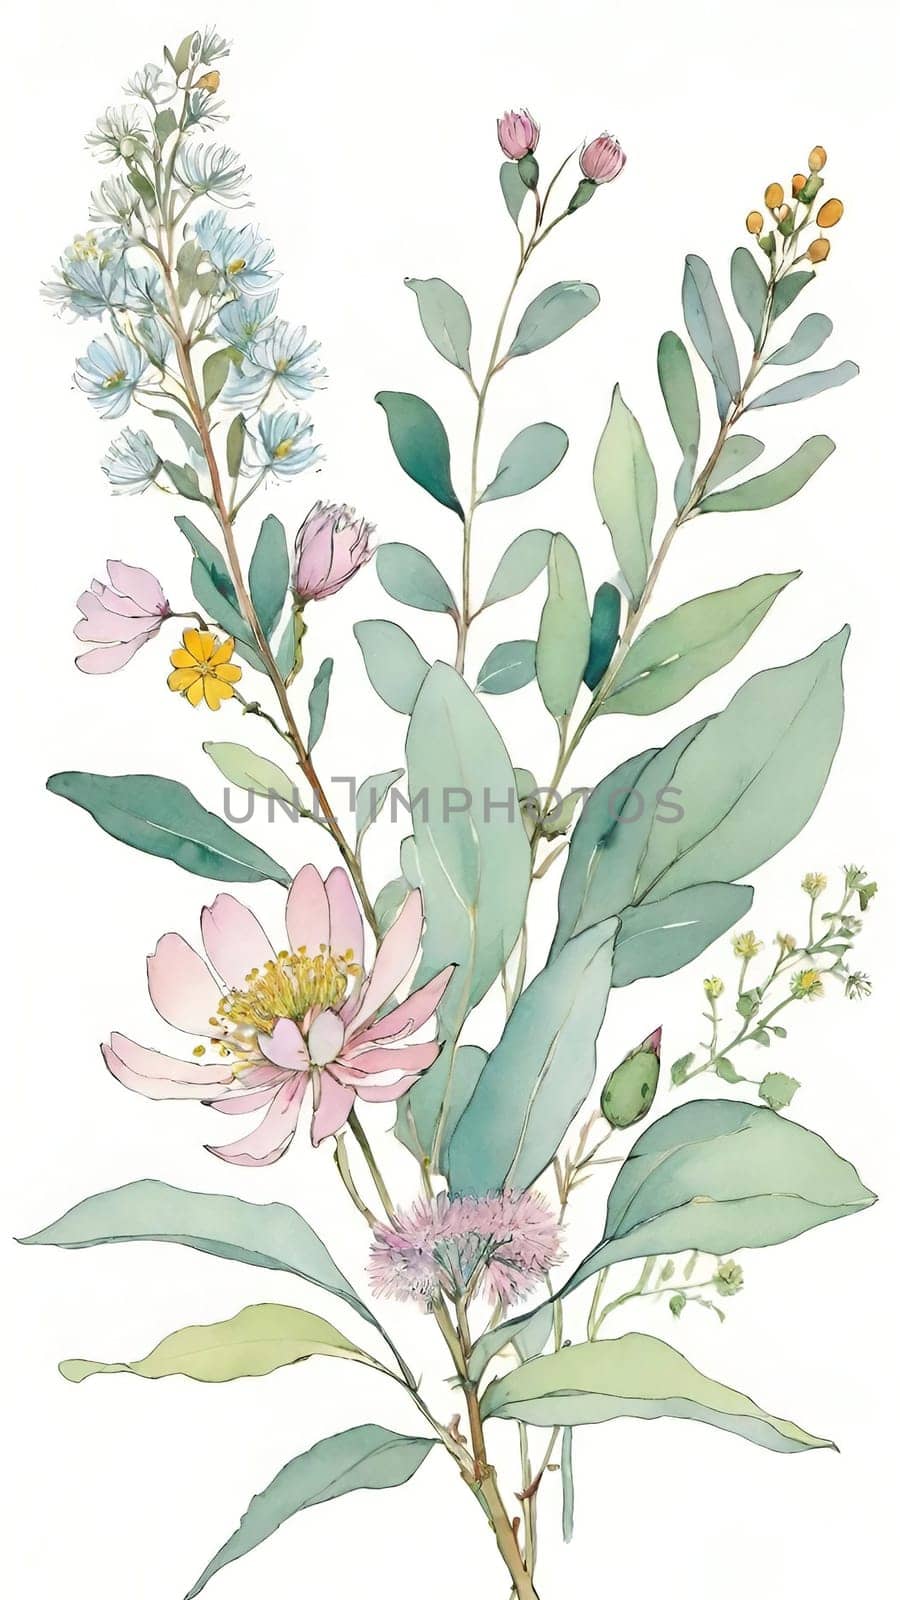 Watercolor illustration of wildflowers and eucalyptus branches.Eucalyptus branch with flowers and leaves. Watercolor floral background with flowers and leaves. Computer drawn illustration.